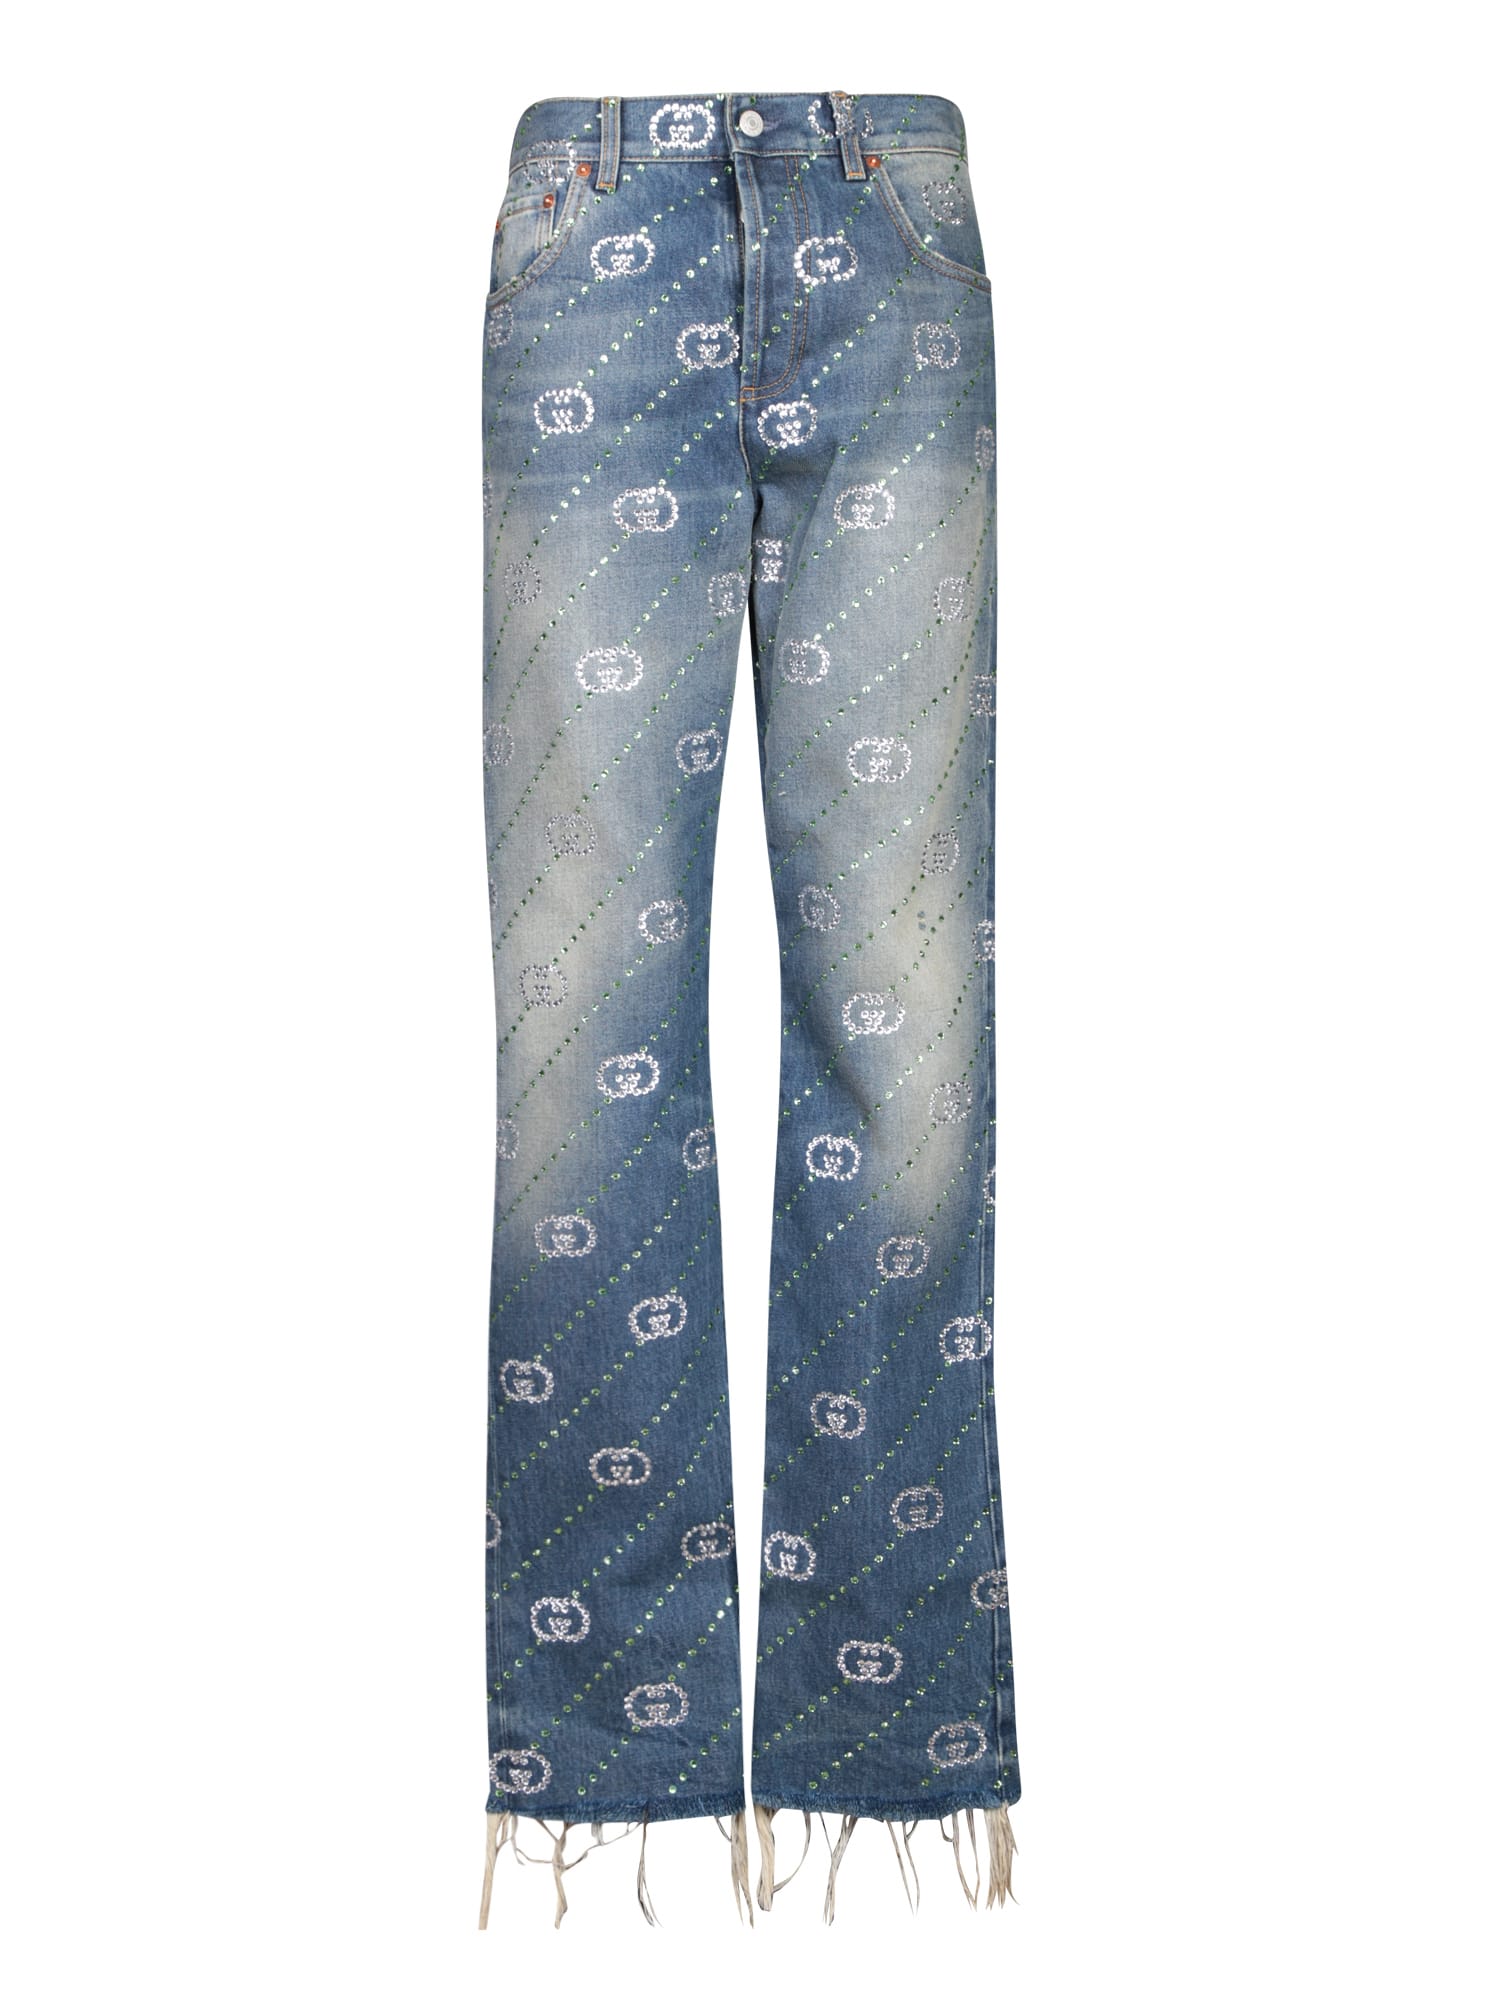 GUCCI GG CROSSOVER CRYSTALS JEANS